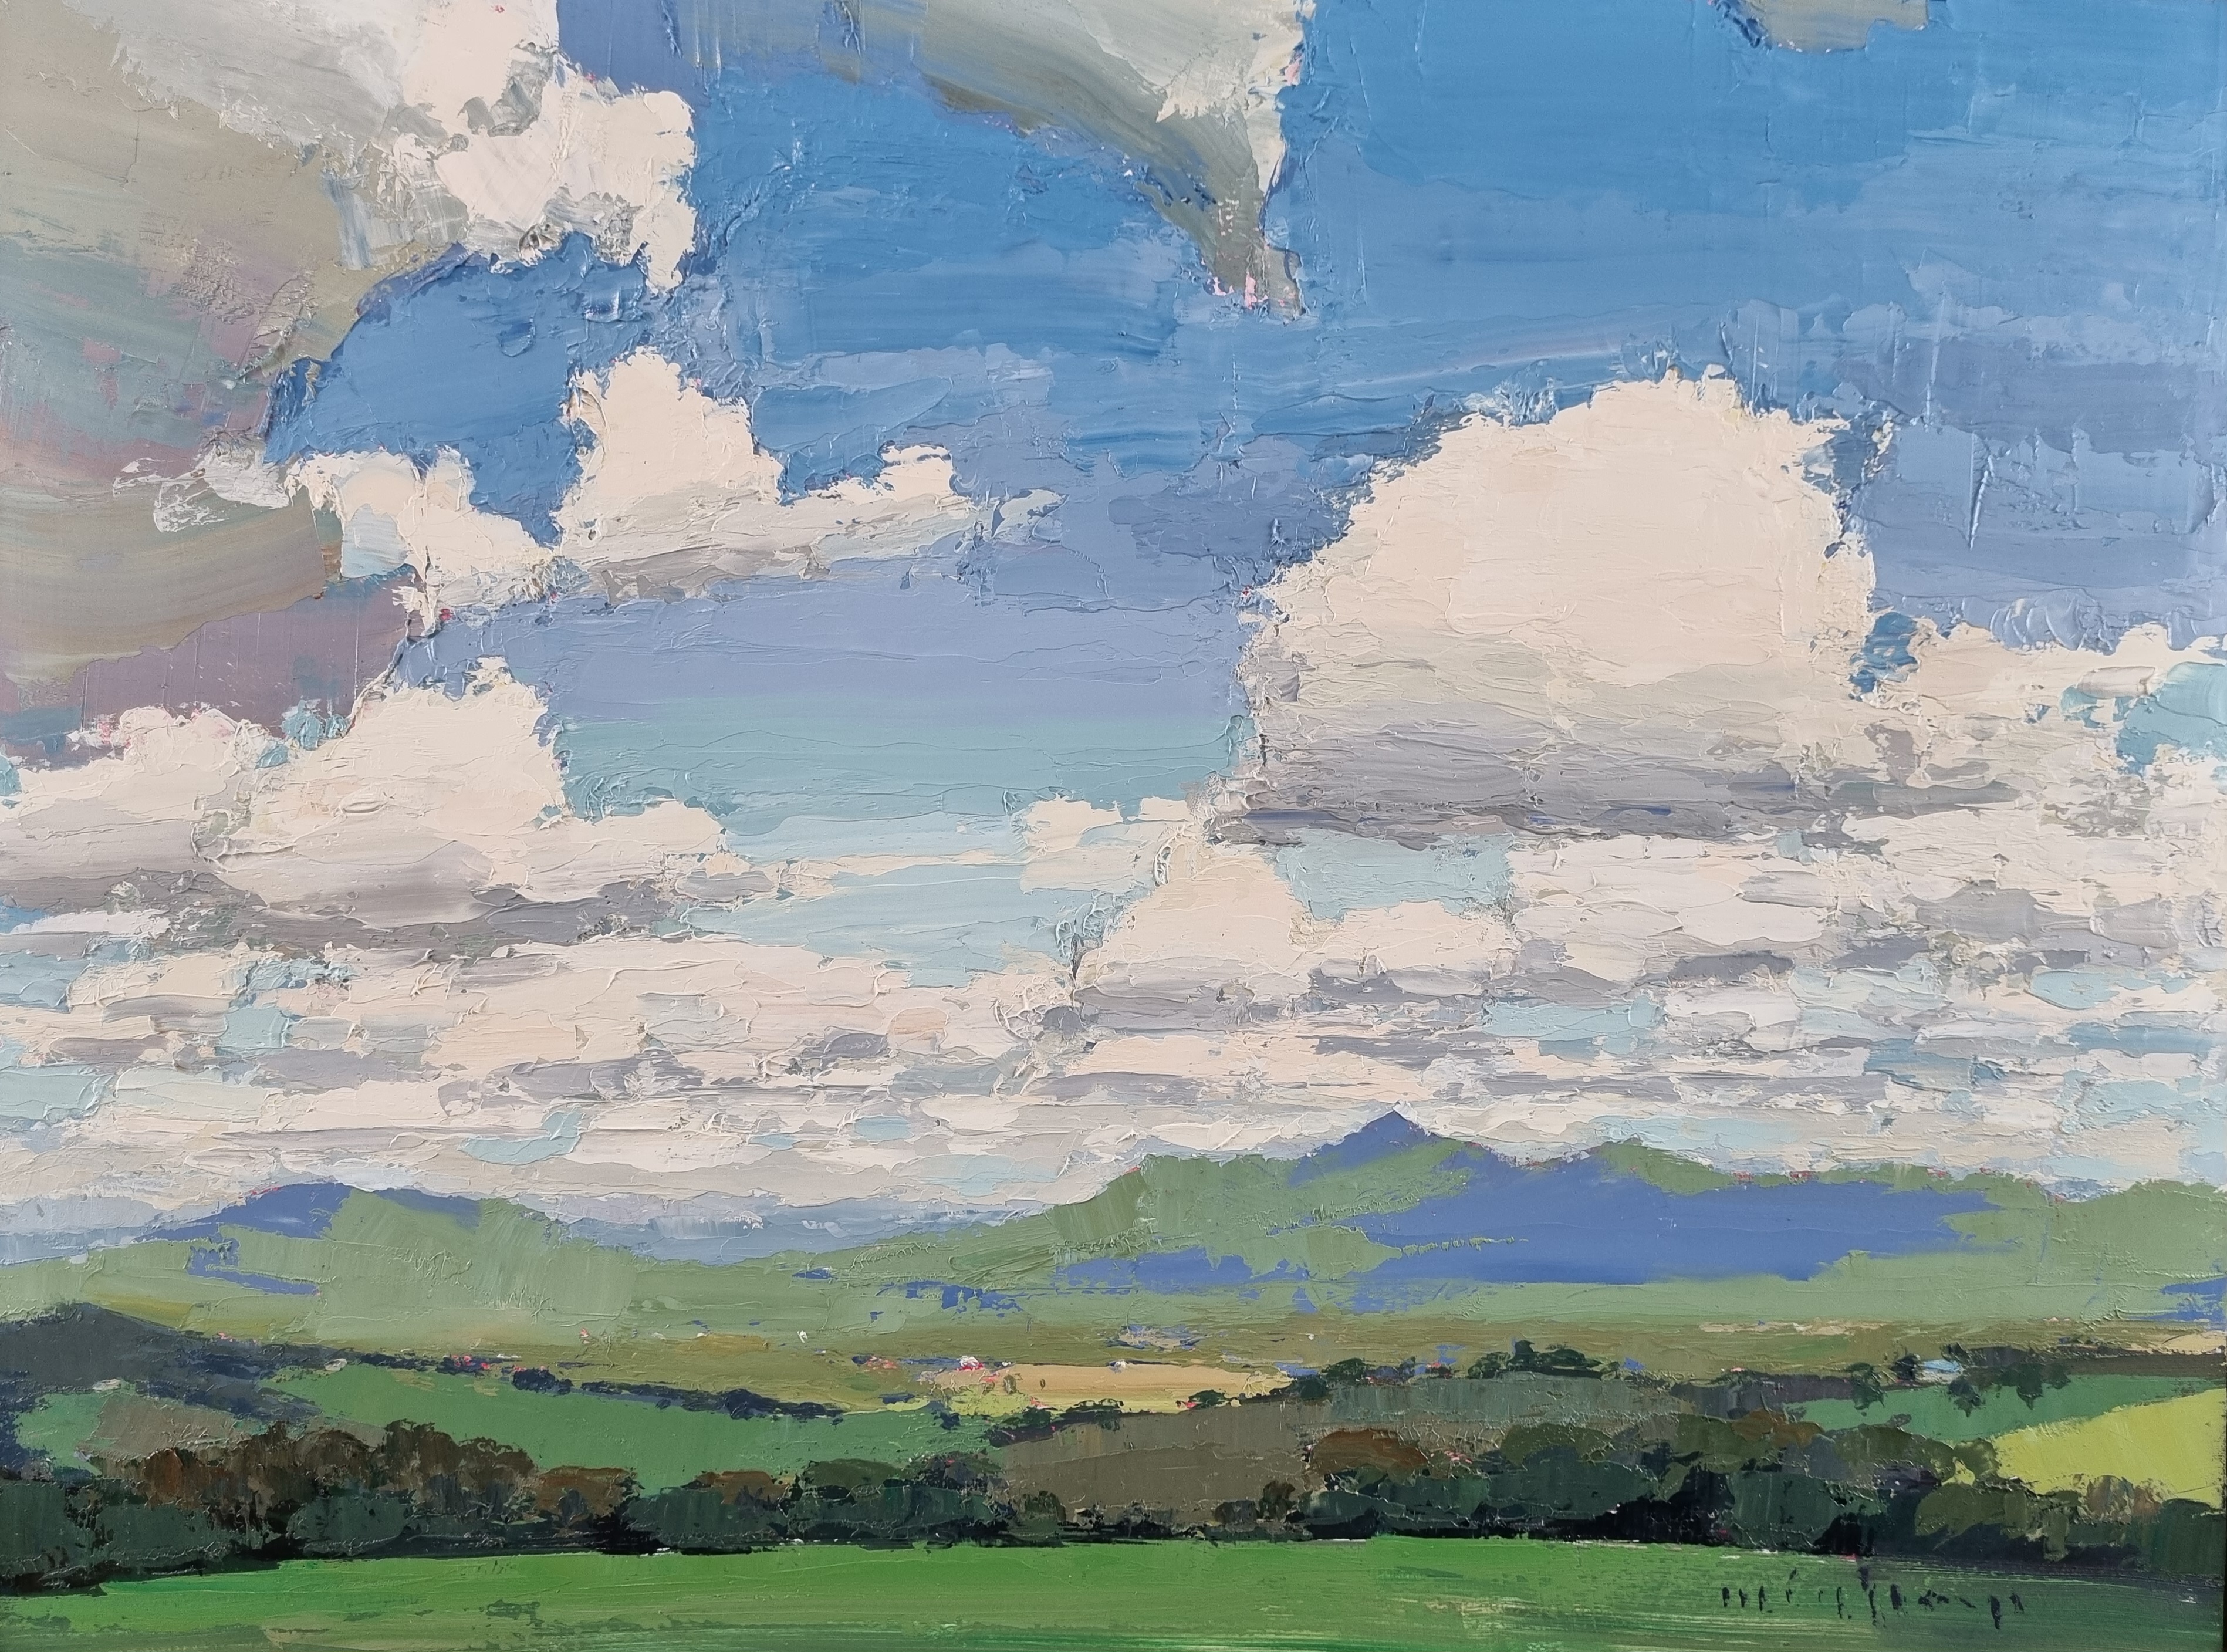 A cloudy day, Samford valley by Minhan Cho | Lethbridge 20000 2023 Finalists | Lethbridge Gallery